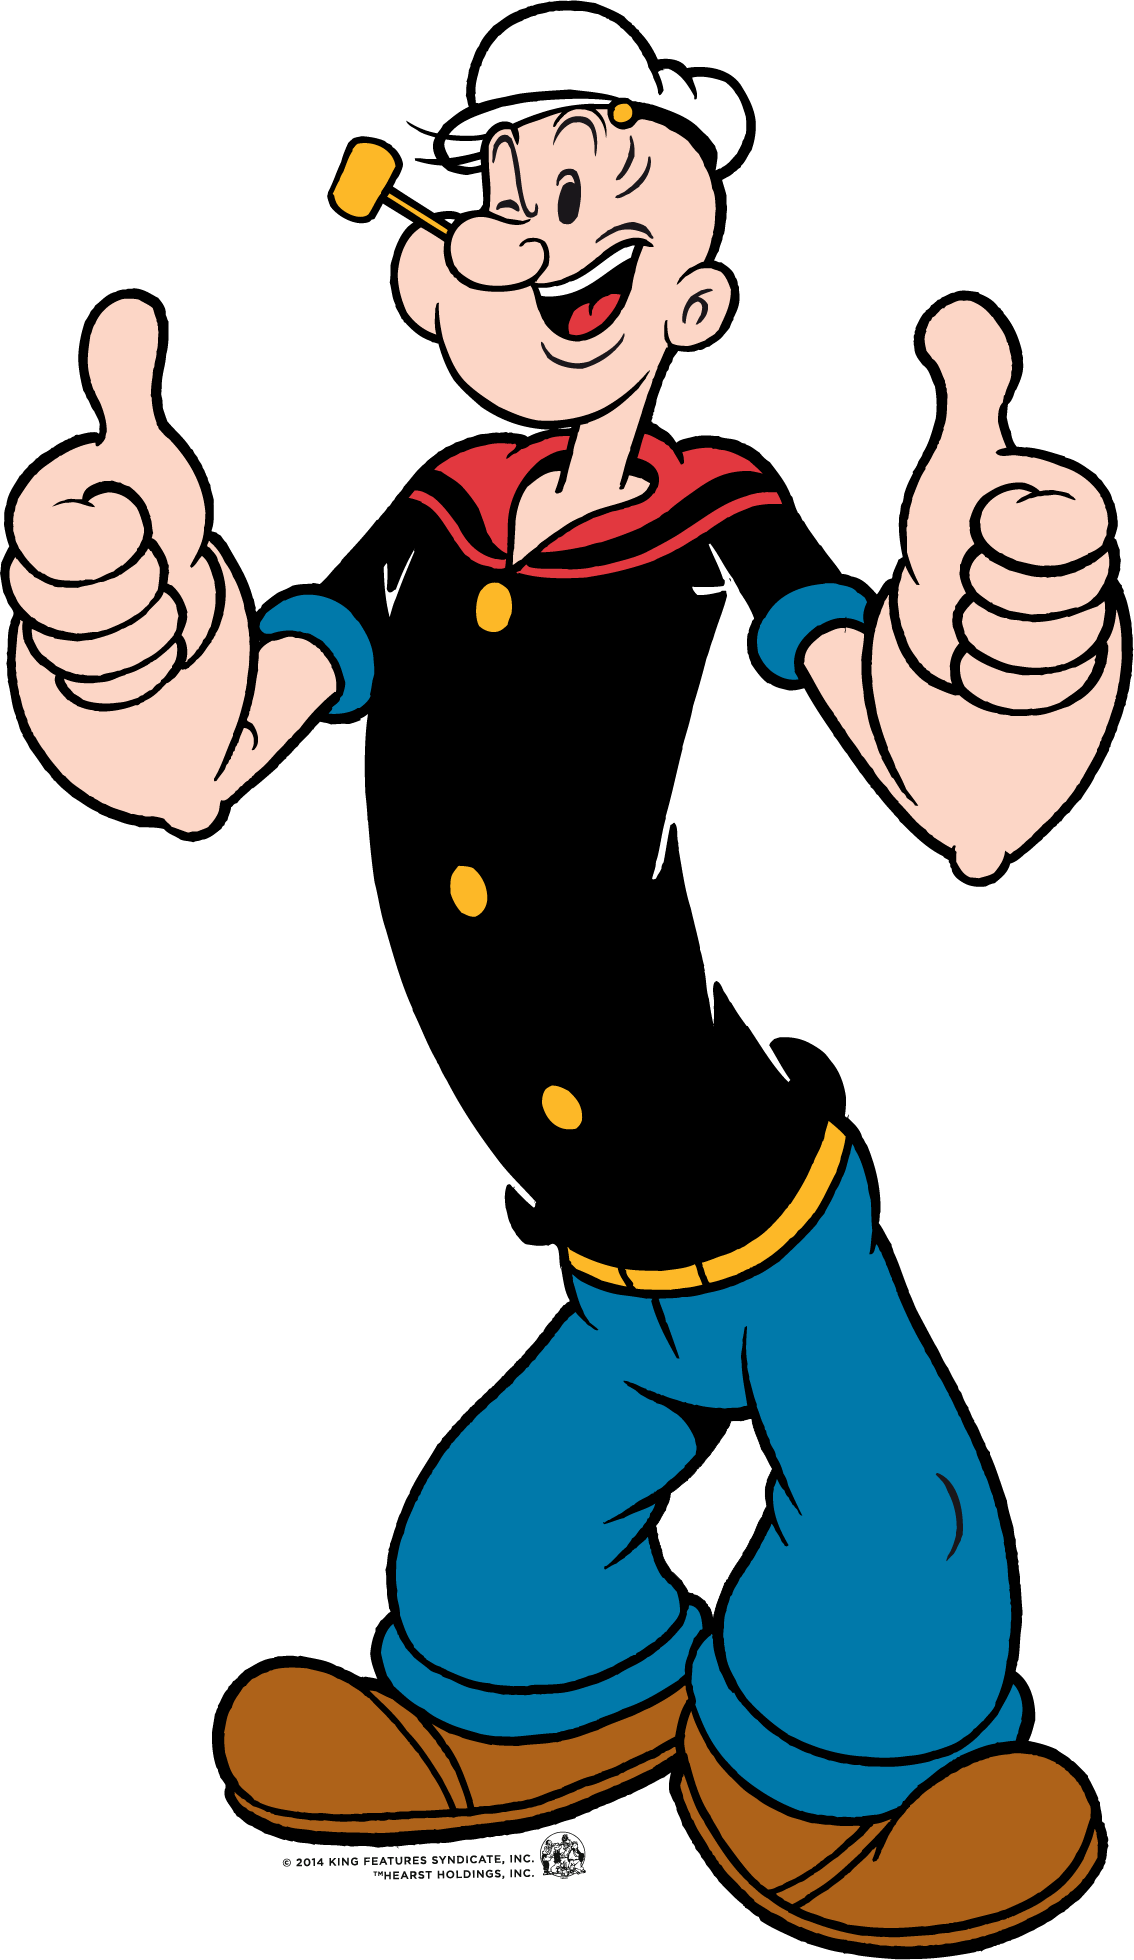 Popeye The Sailor Transparent Images